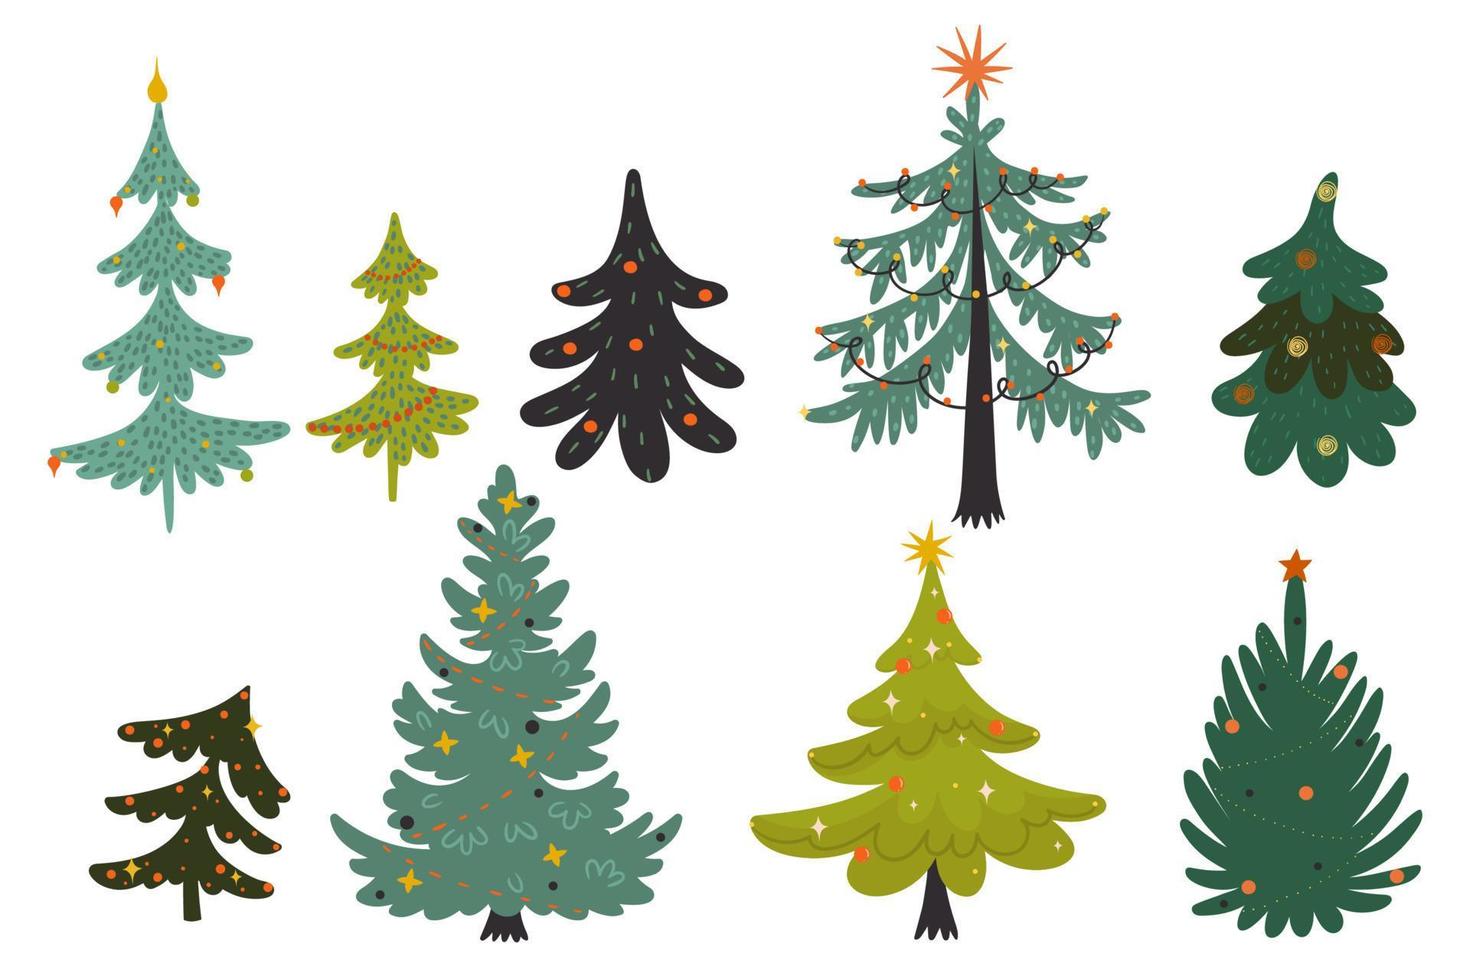 Set of Christmas trees isolated on a white background. Vector graphics.